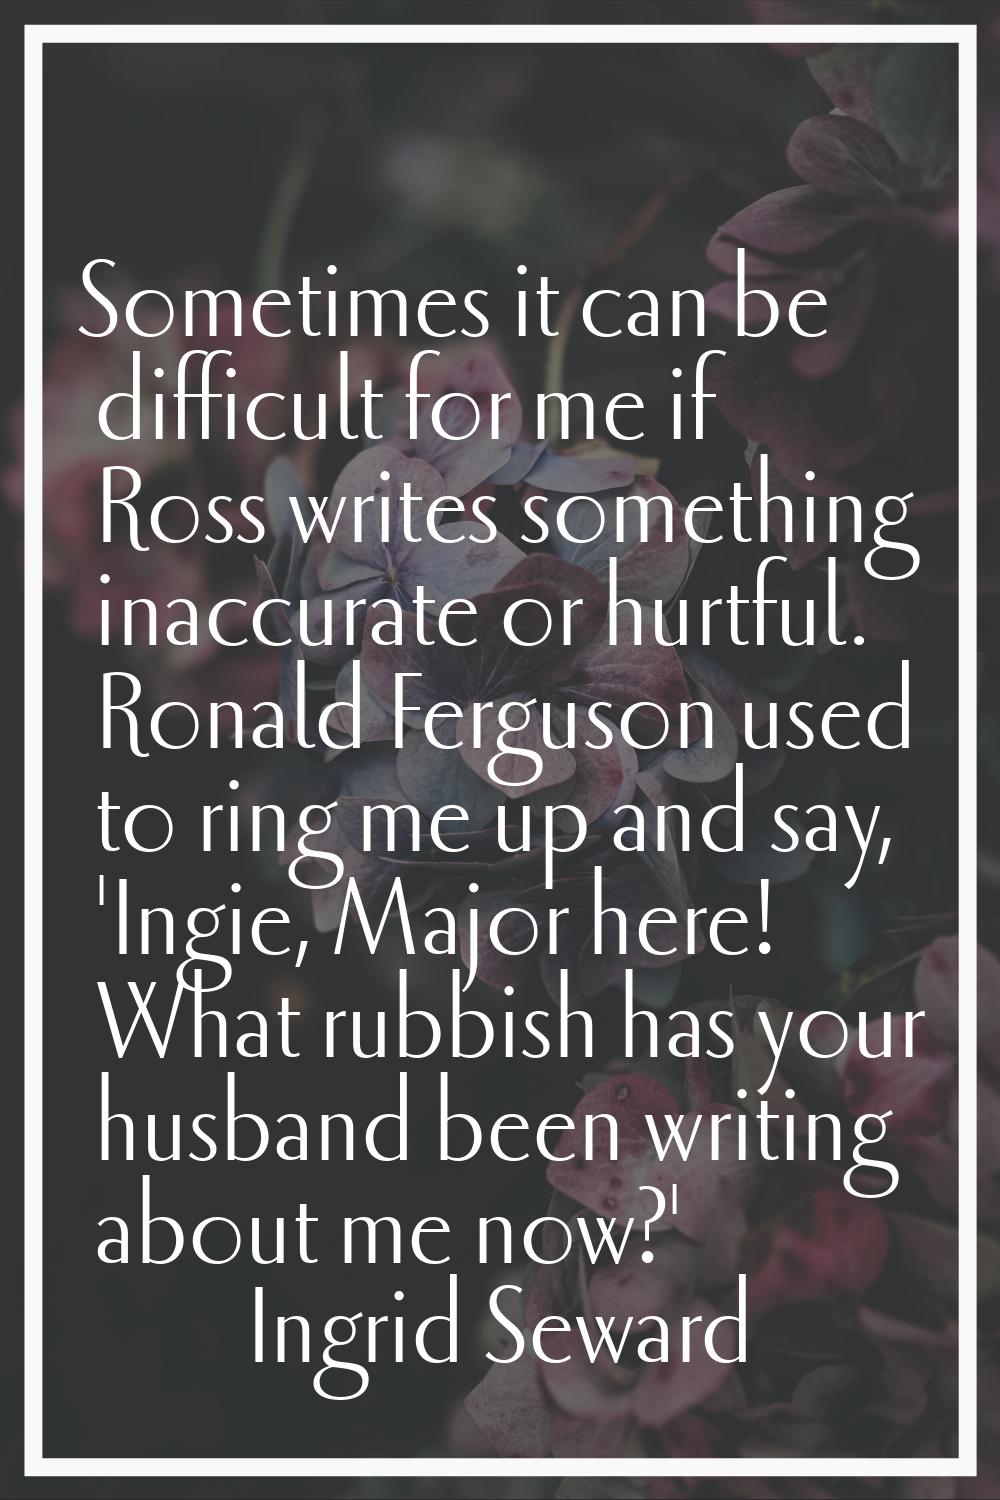 Sometimes it can be difficult for me if Ross writes something inaccurate or hurtful. Ronald Ferguso